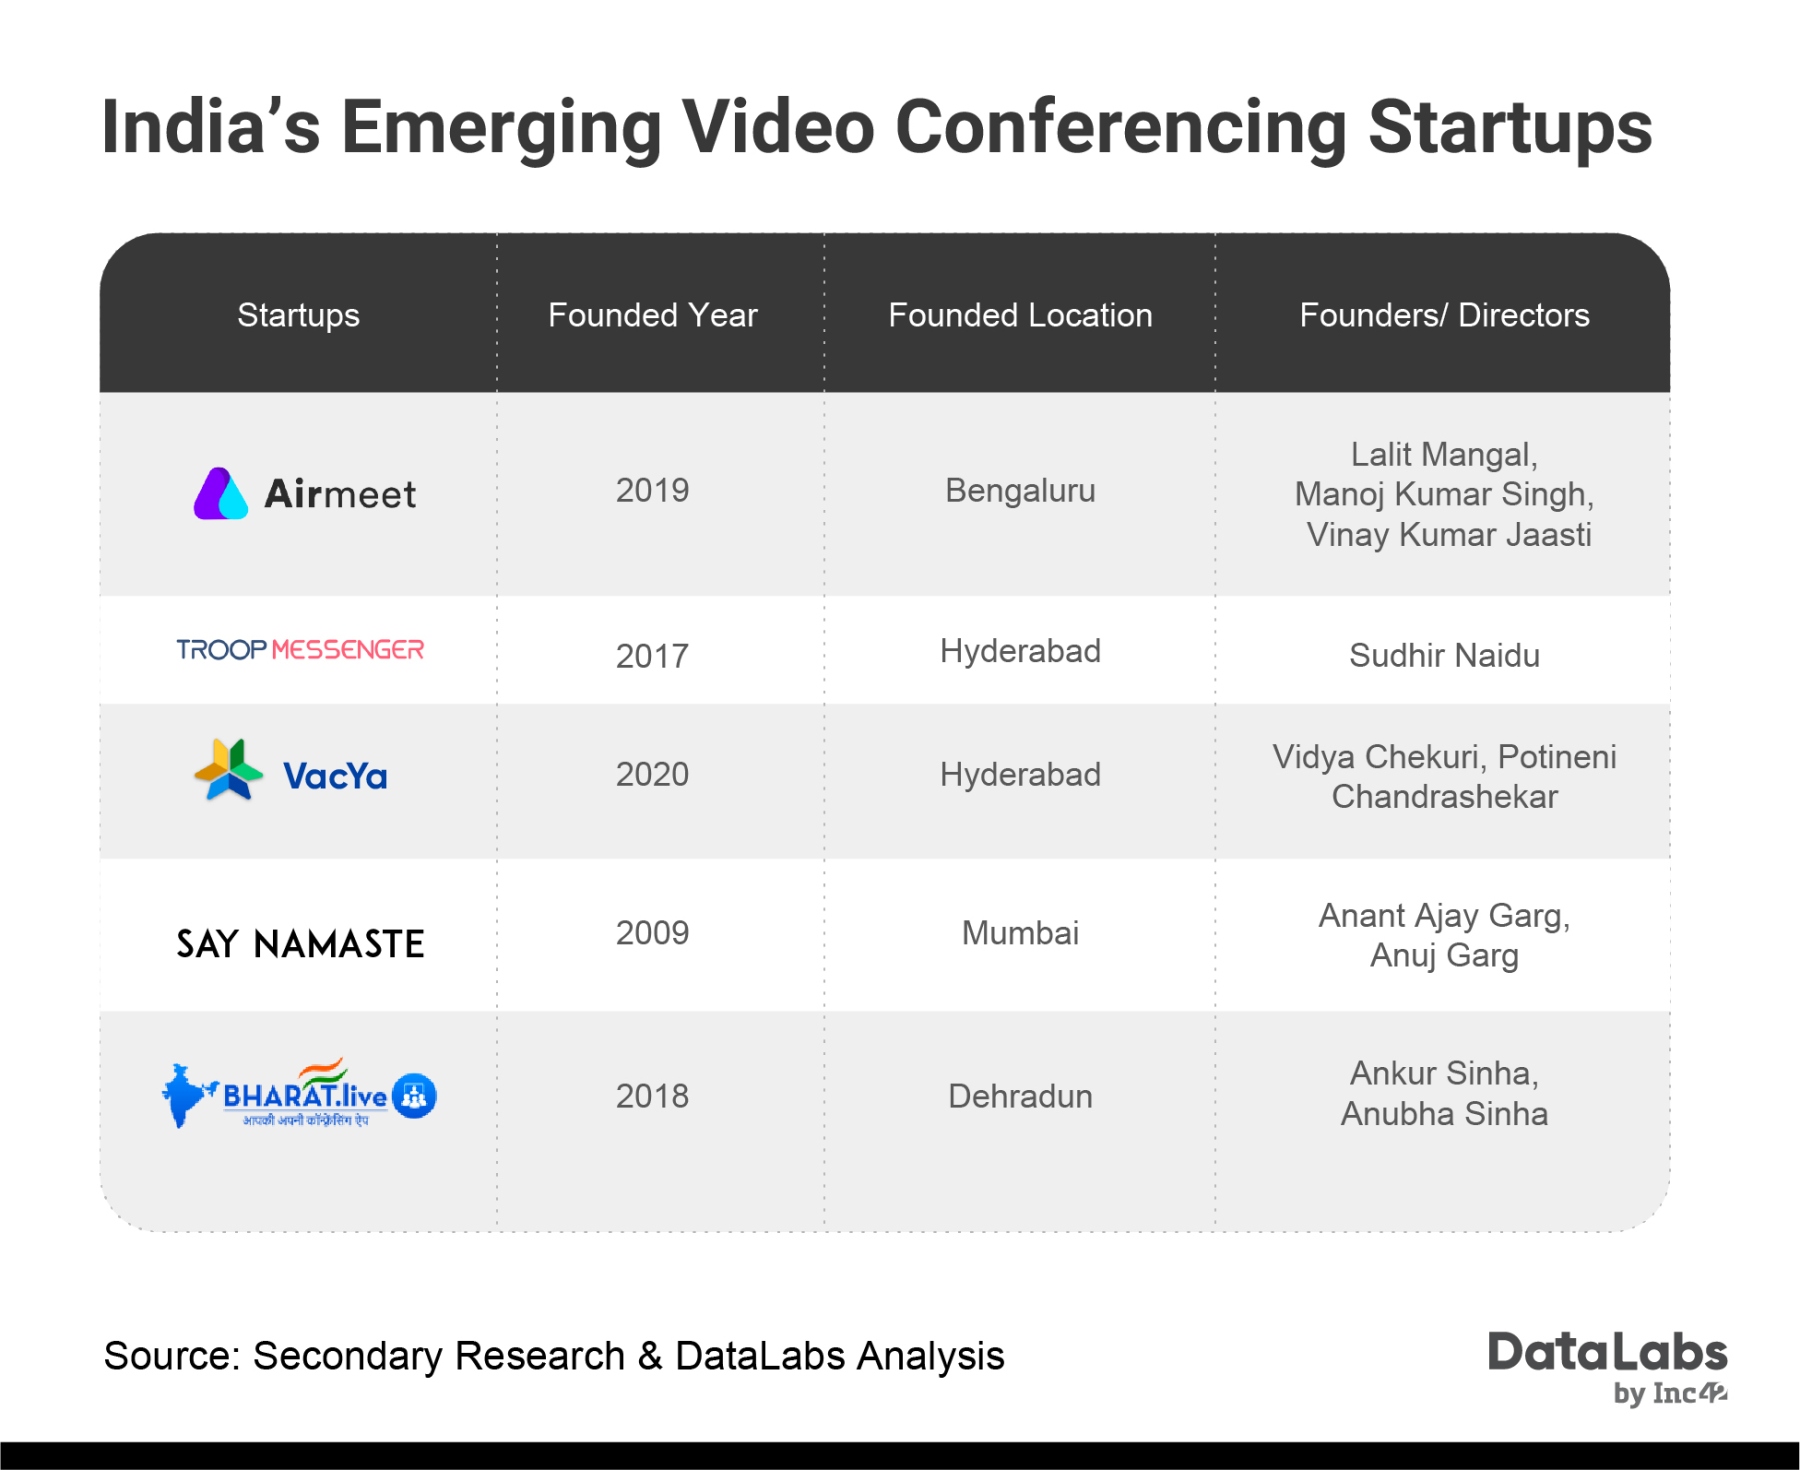 Video conferencing startups in India